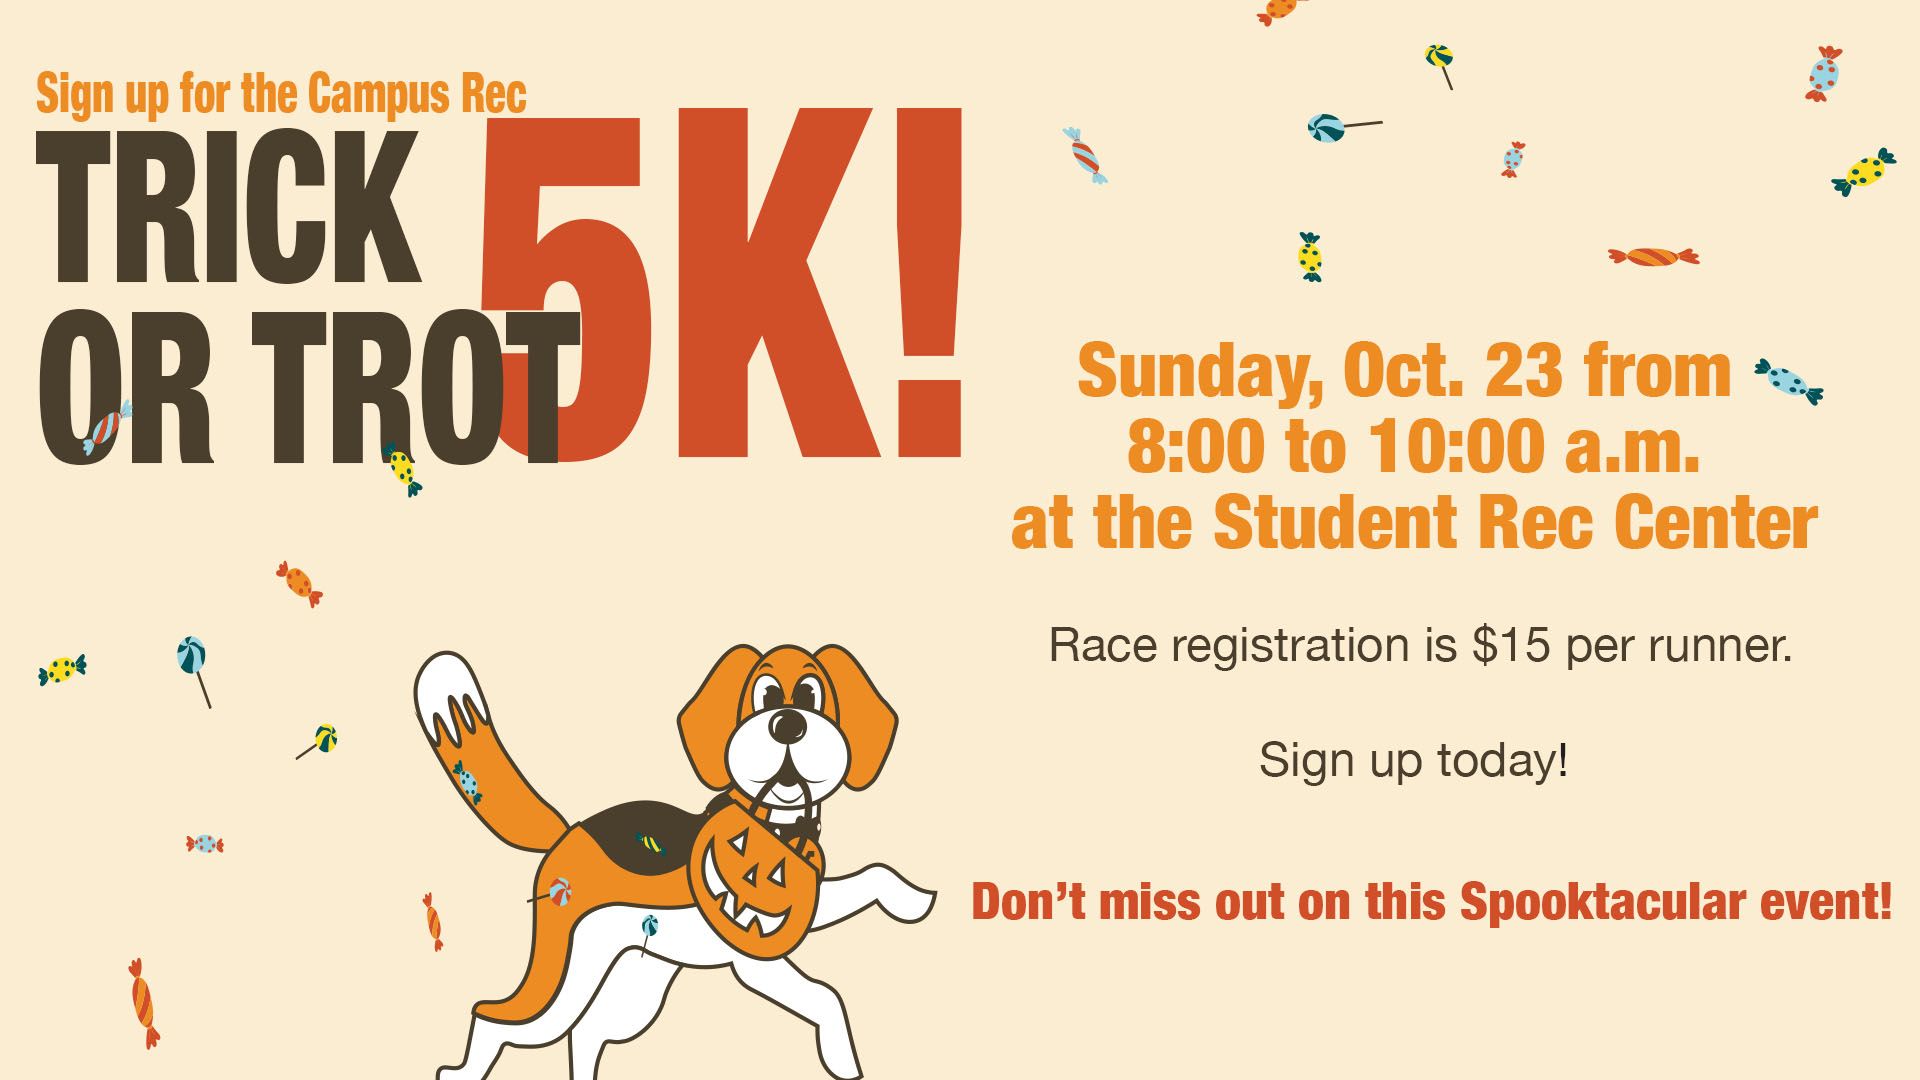 The Trick or Trot 5K will be Sunday, Oct. 23 from 8 to 10 a.m.